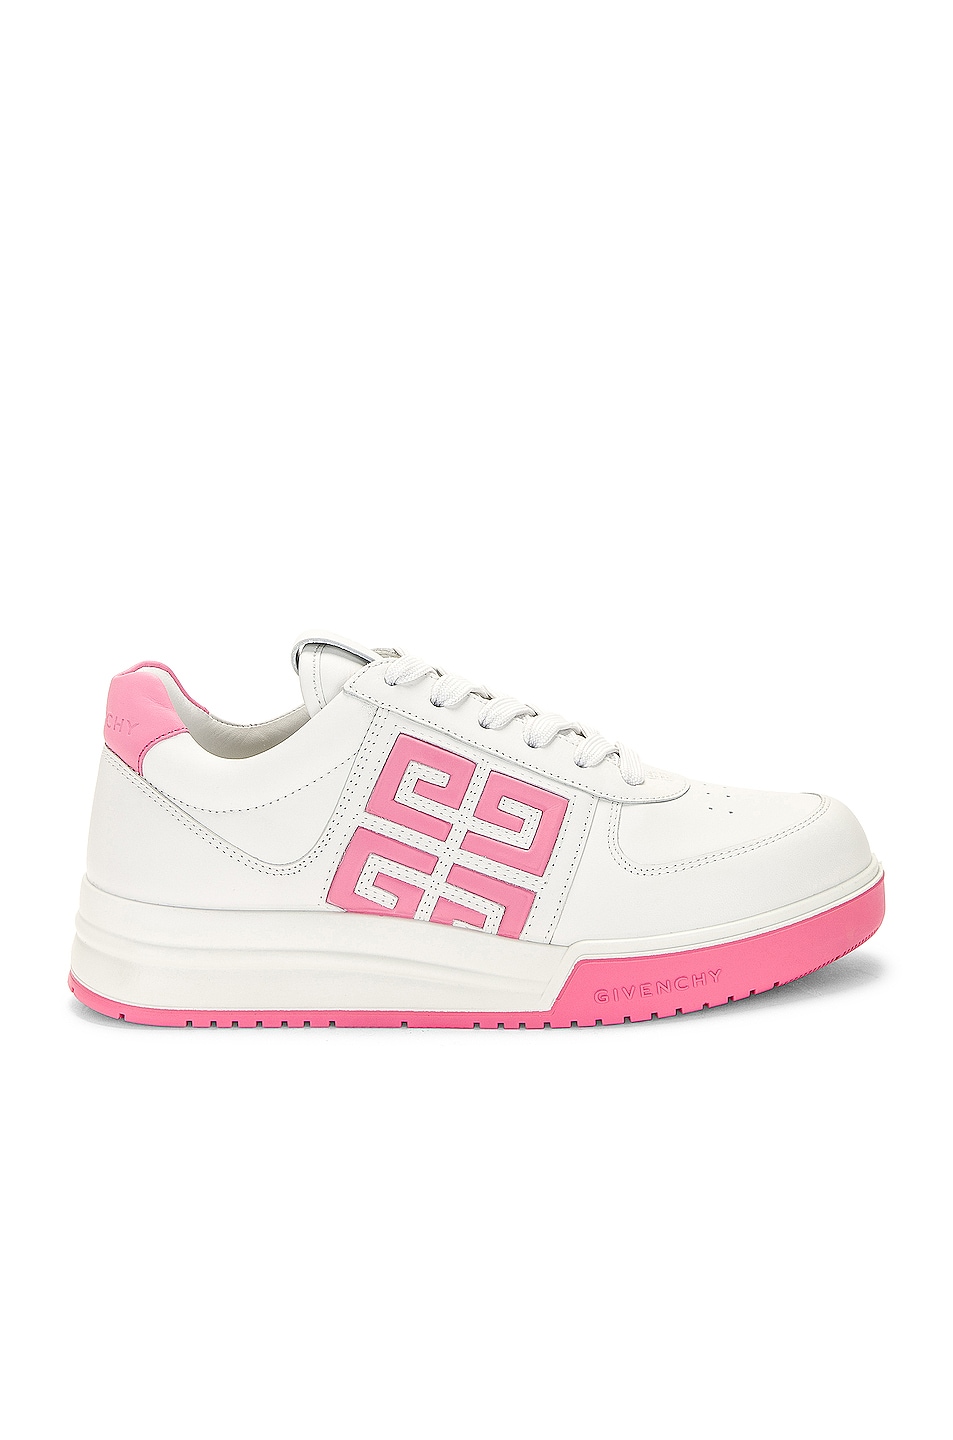 Image 1 of Givenchy G4 Low Top Sneaker in White & Pink